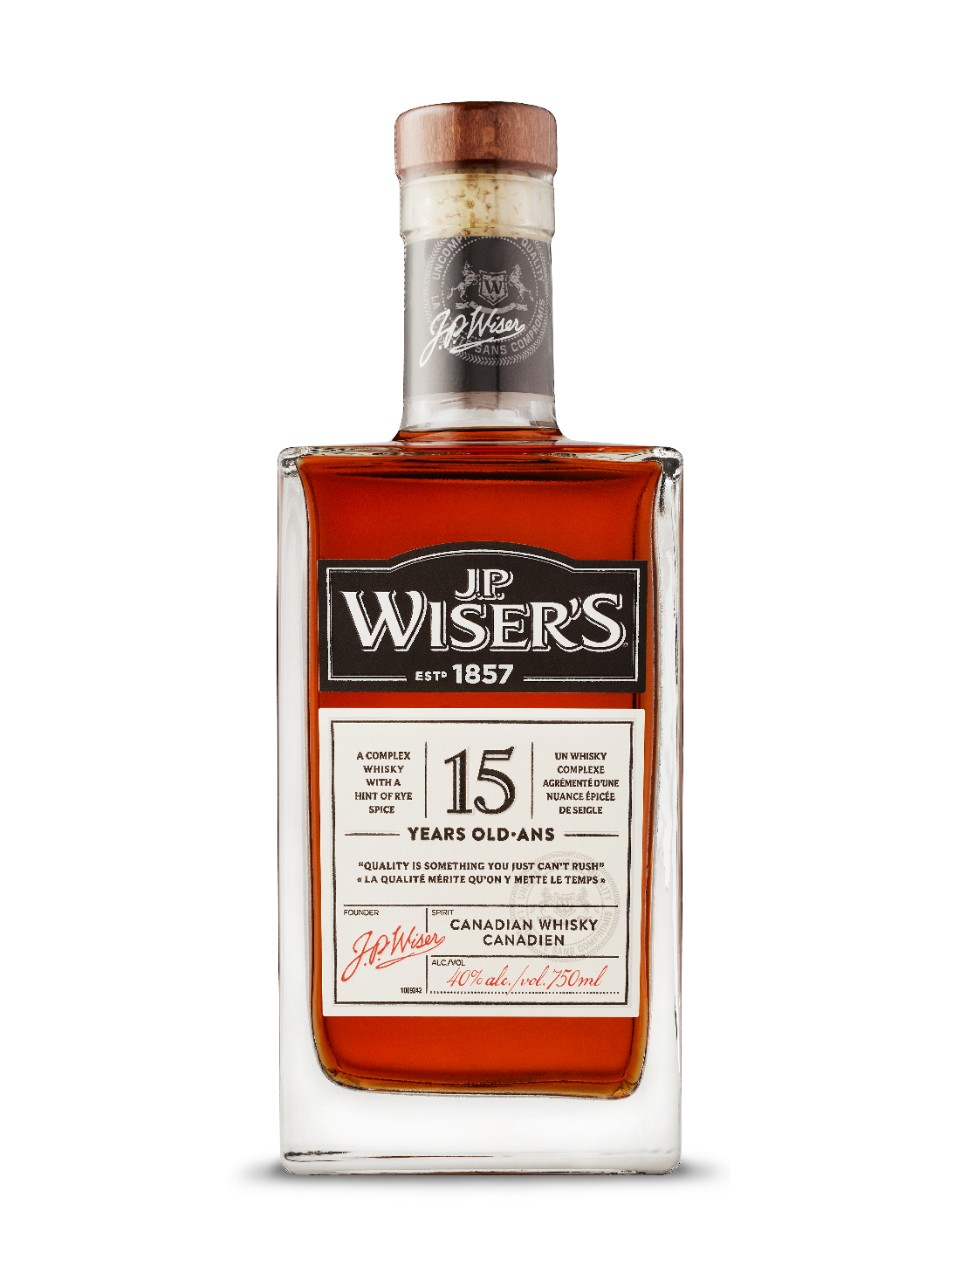 J.P. Wiser's 15 Year Old Canadian Whisky from LCBO